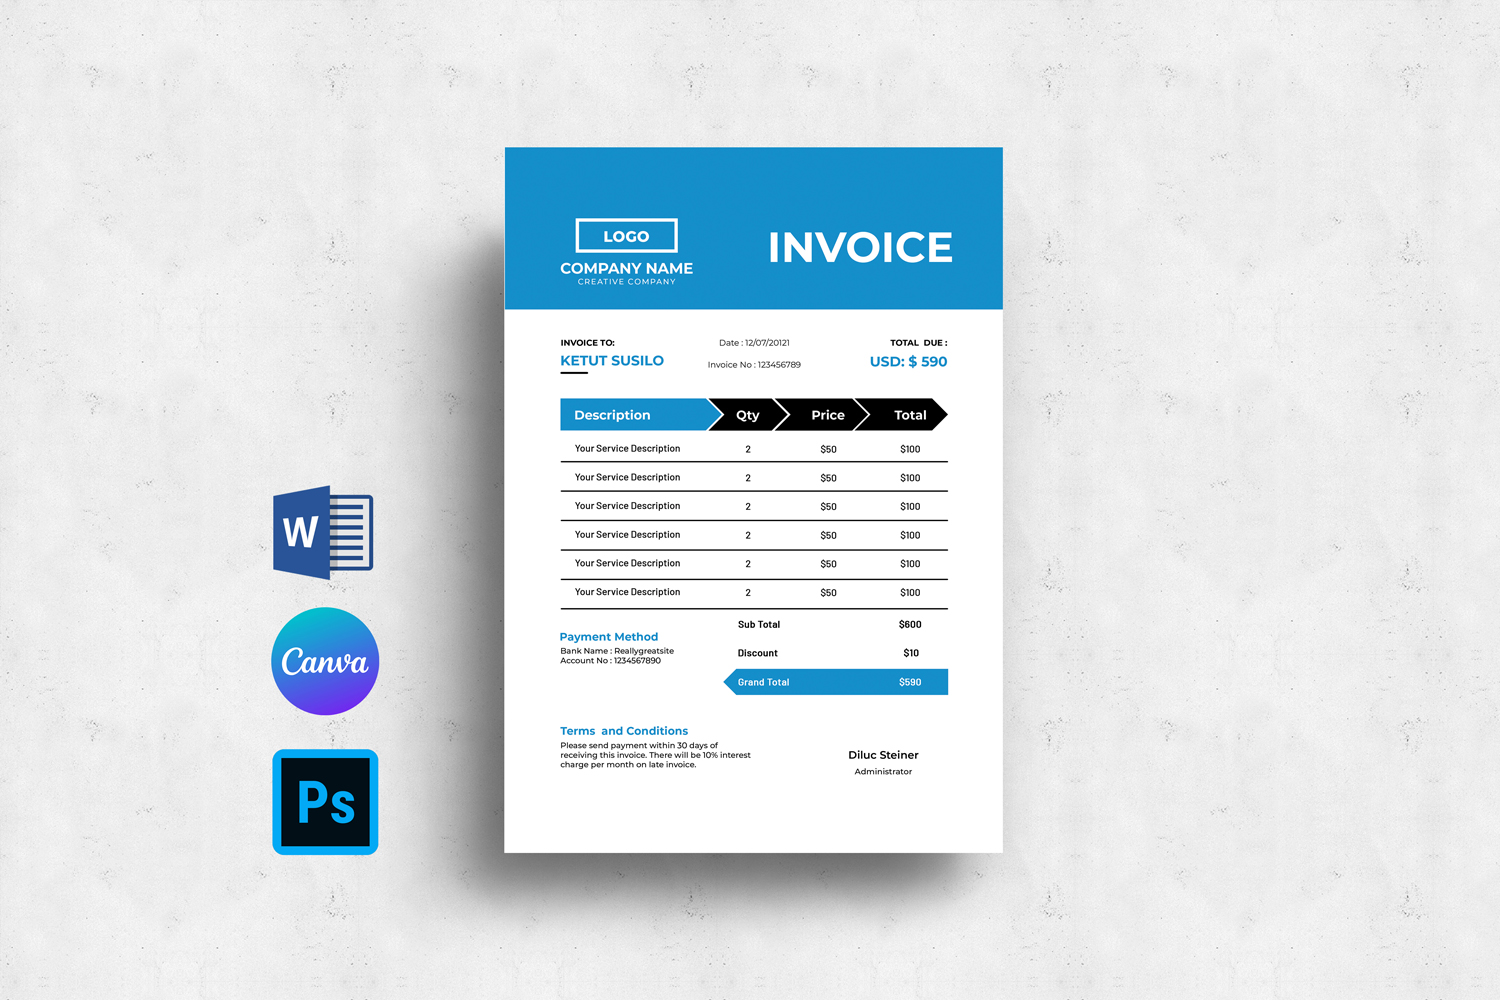 Template #360436 Invoice Template Webdesign Template - Logo template Preview